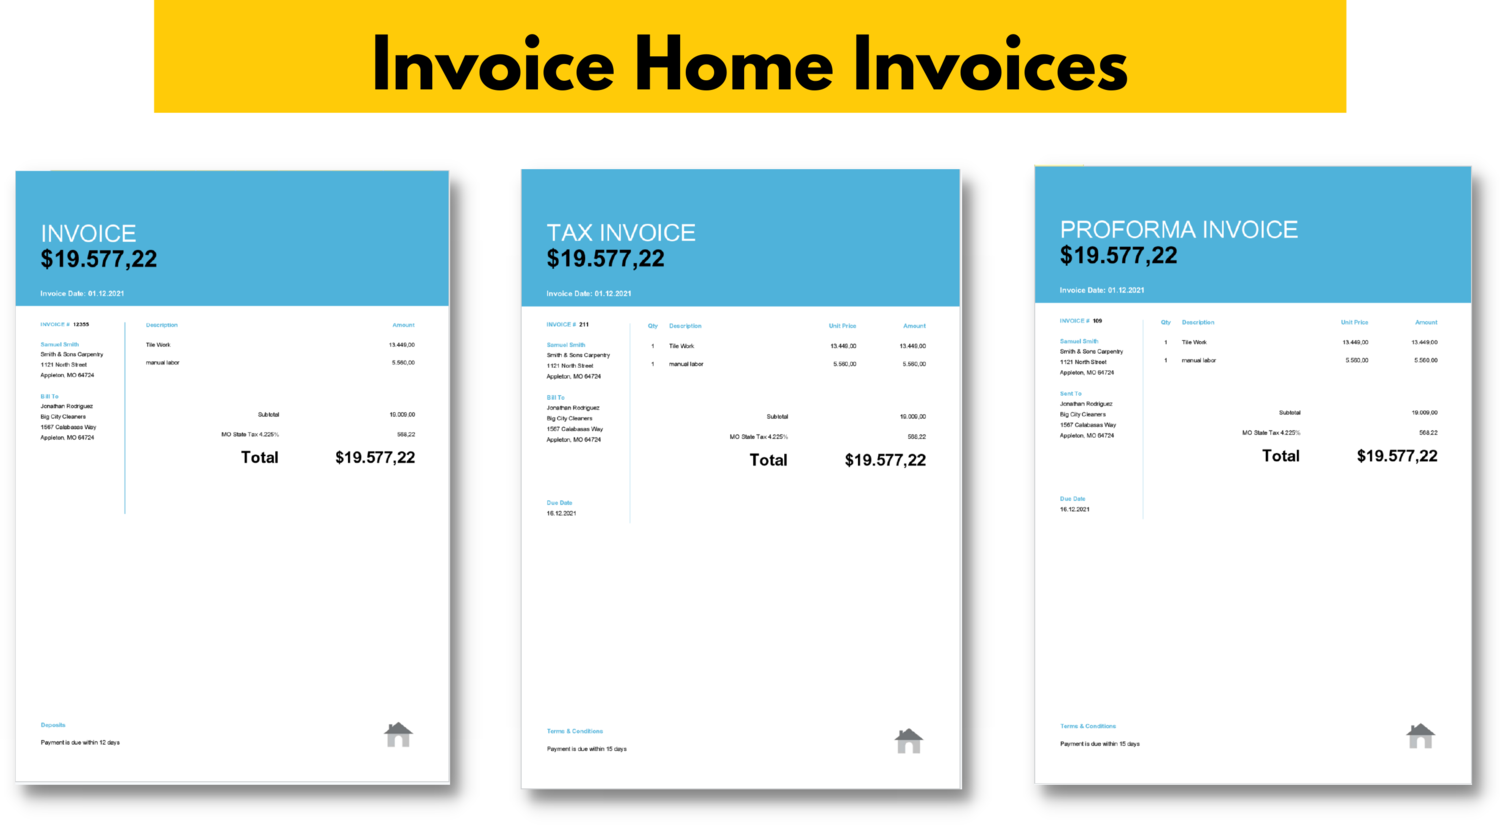 Invoicehome